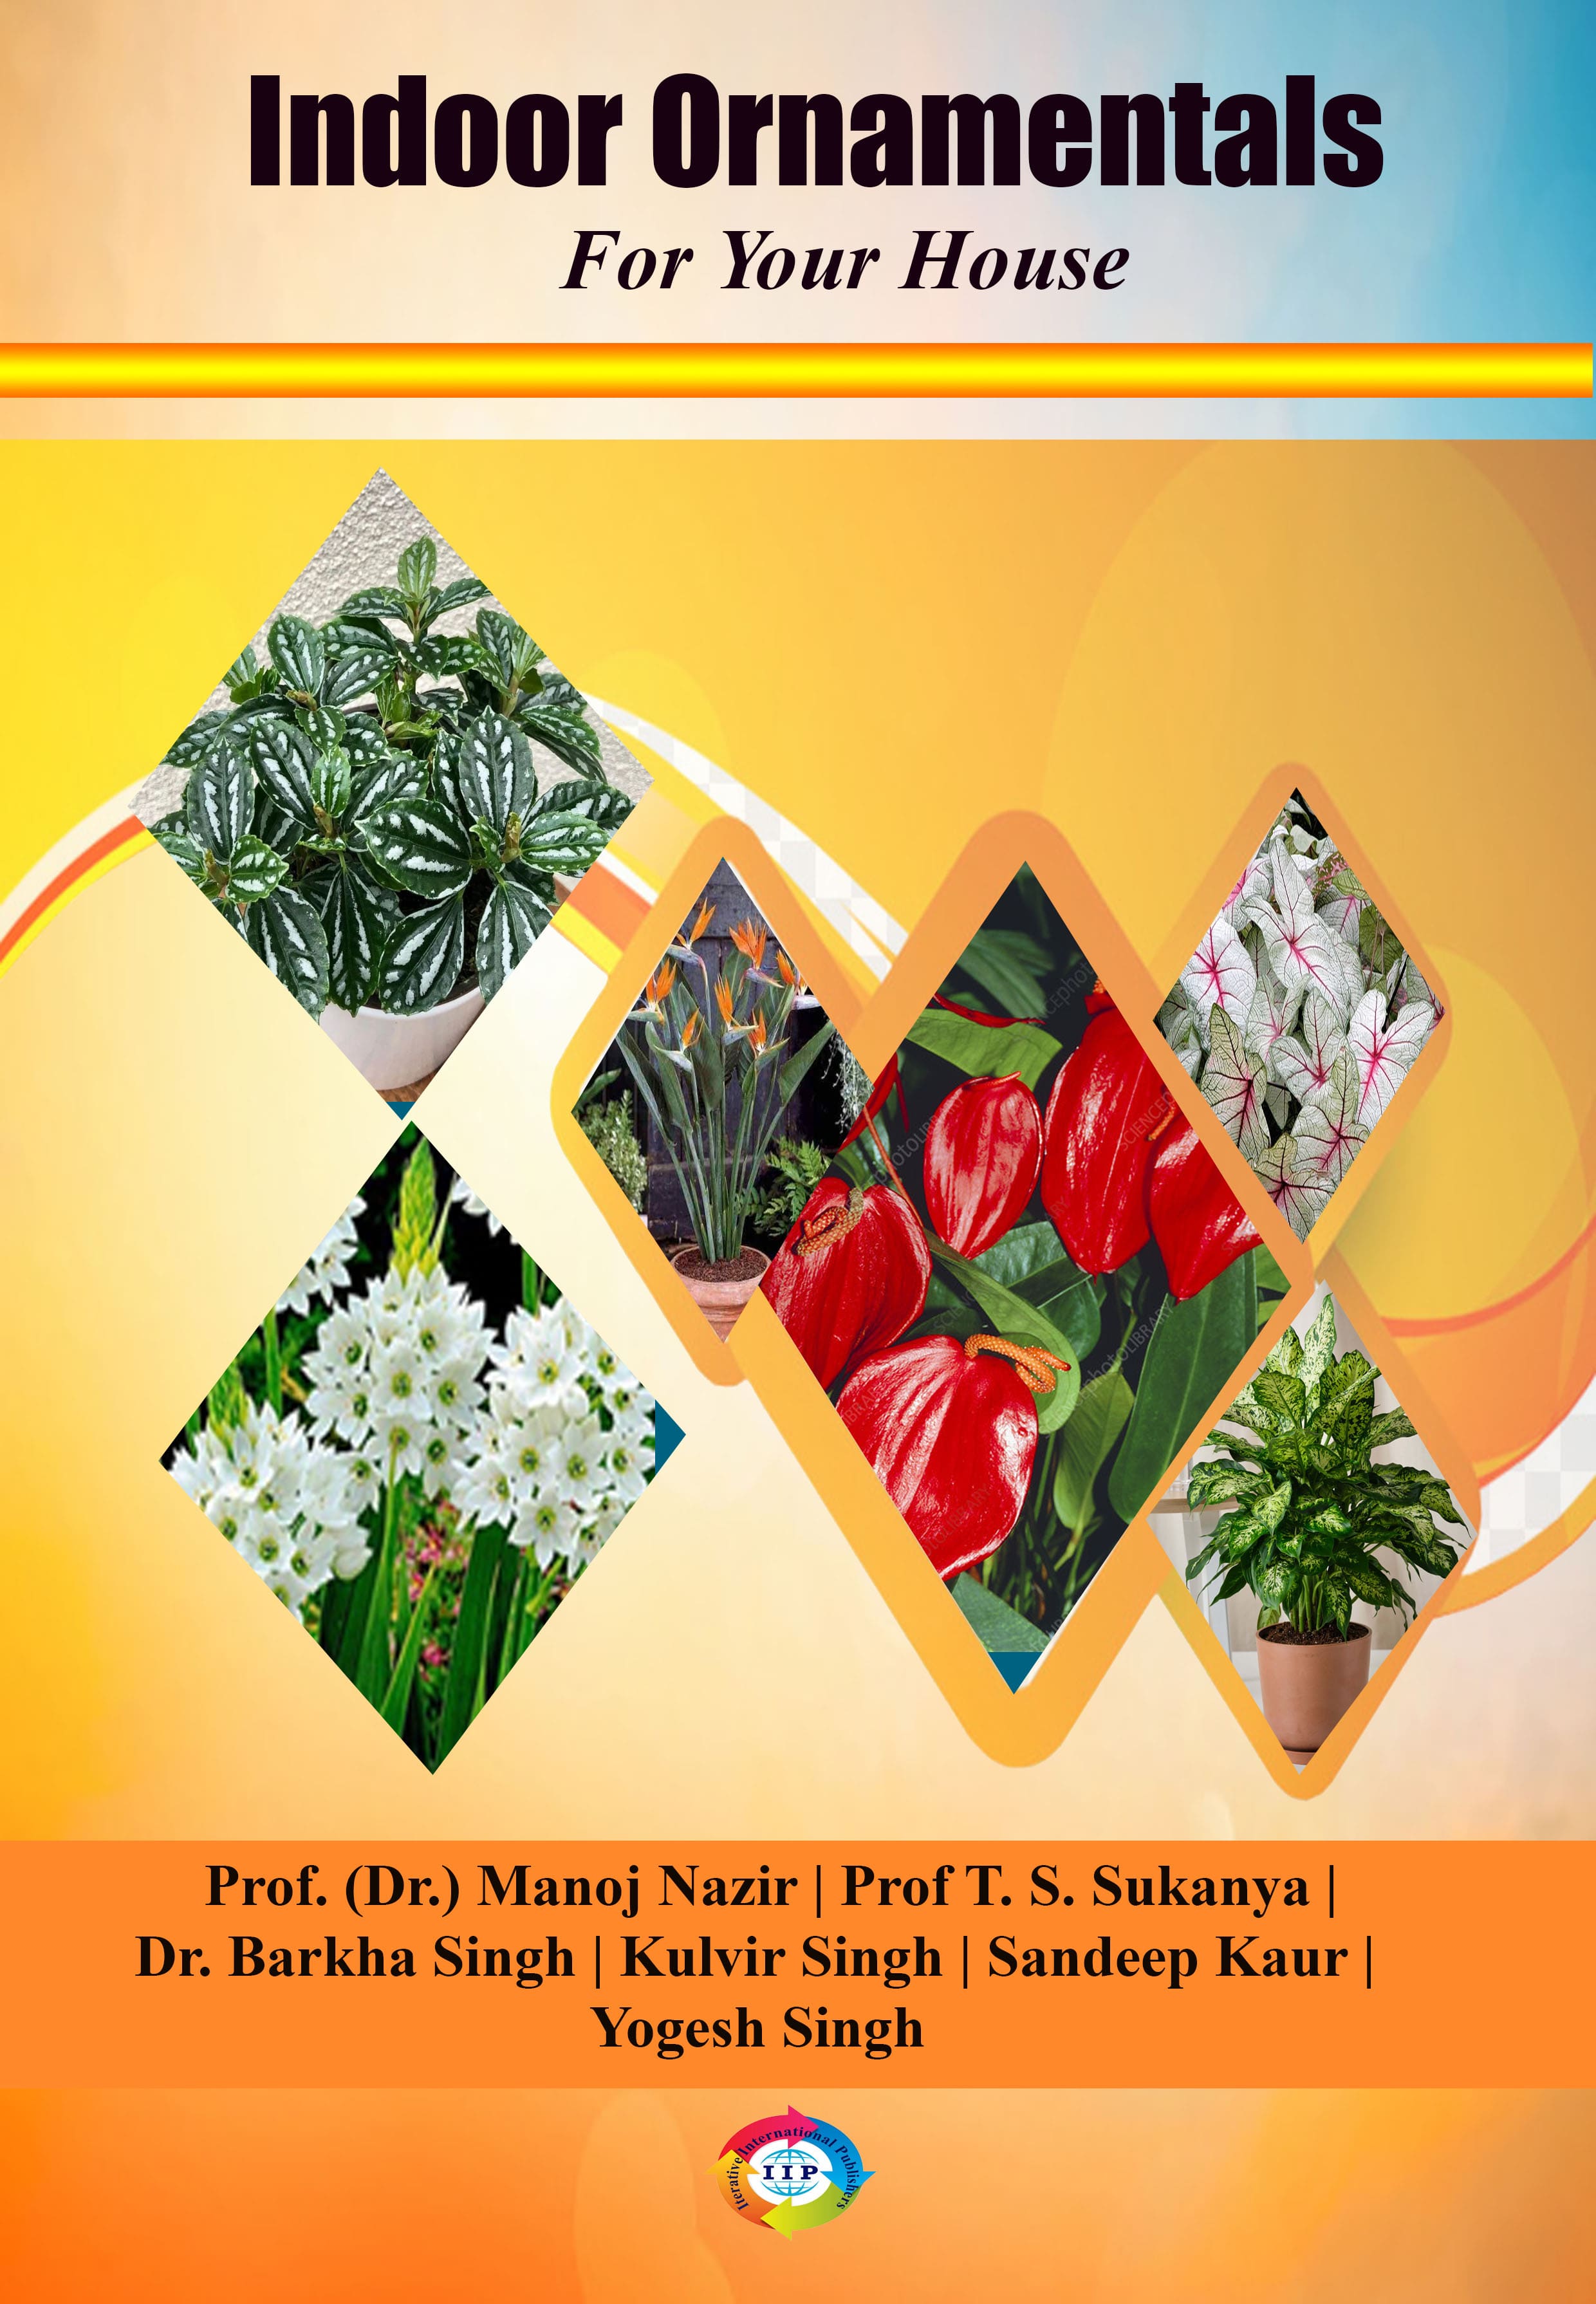 INDOOR ORNAMENTALS...... FOR YOUR HOUSE